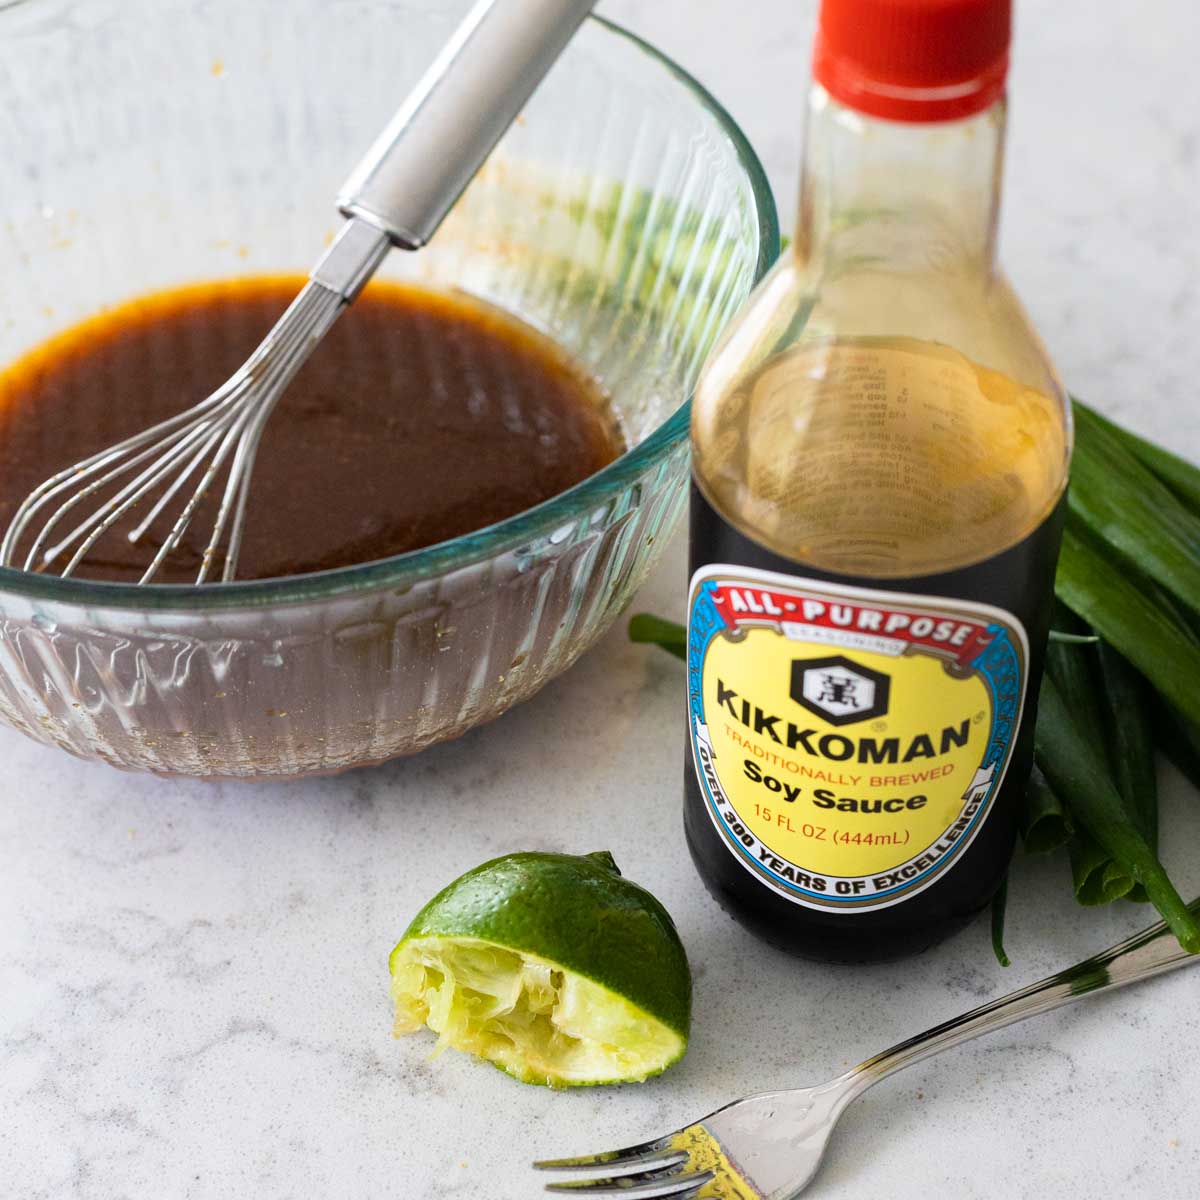 A mixing bowl with a whisk is mixing together the soy sauce, lime juice, and other ingredients for the marinade. A bottle of Soy sauce and a squeezed lemon are in front.